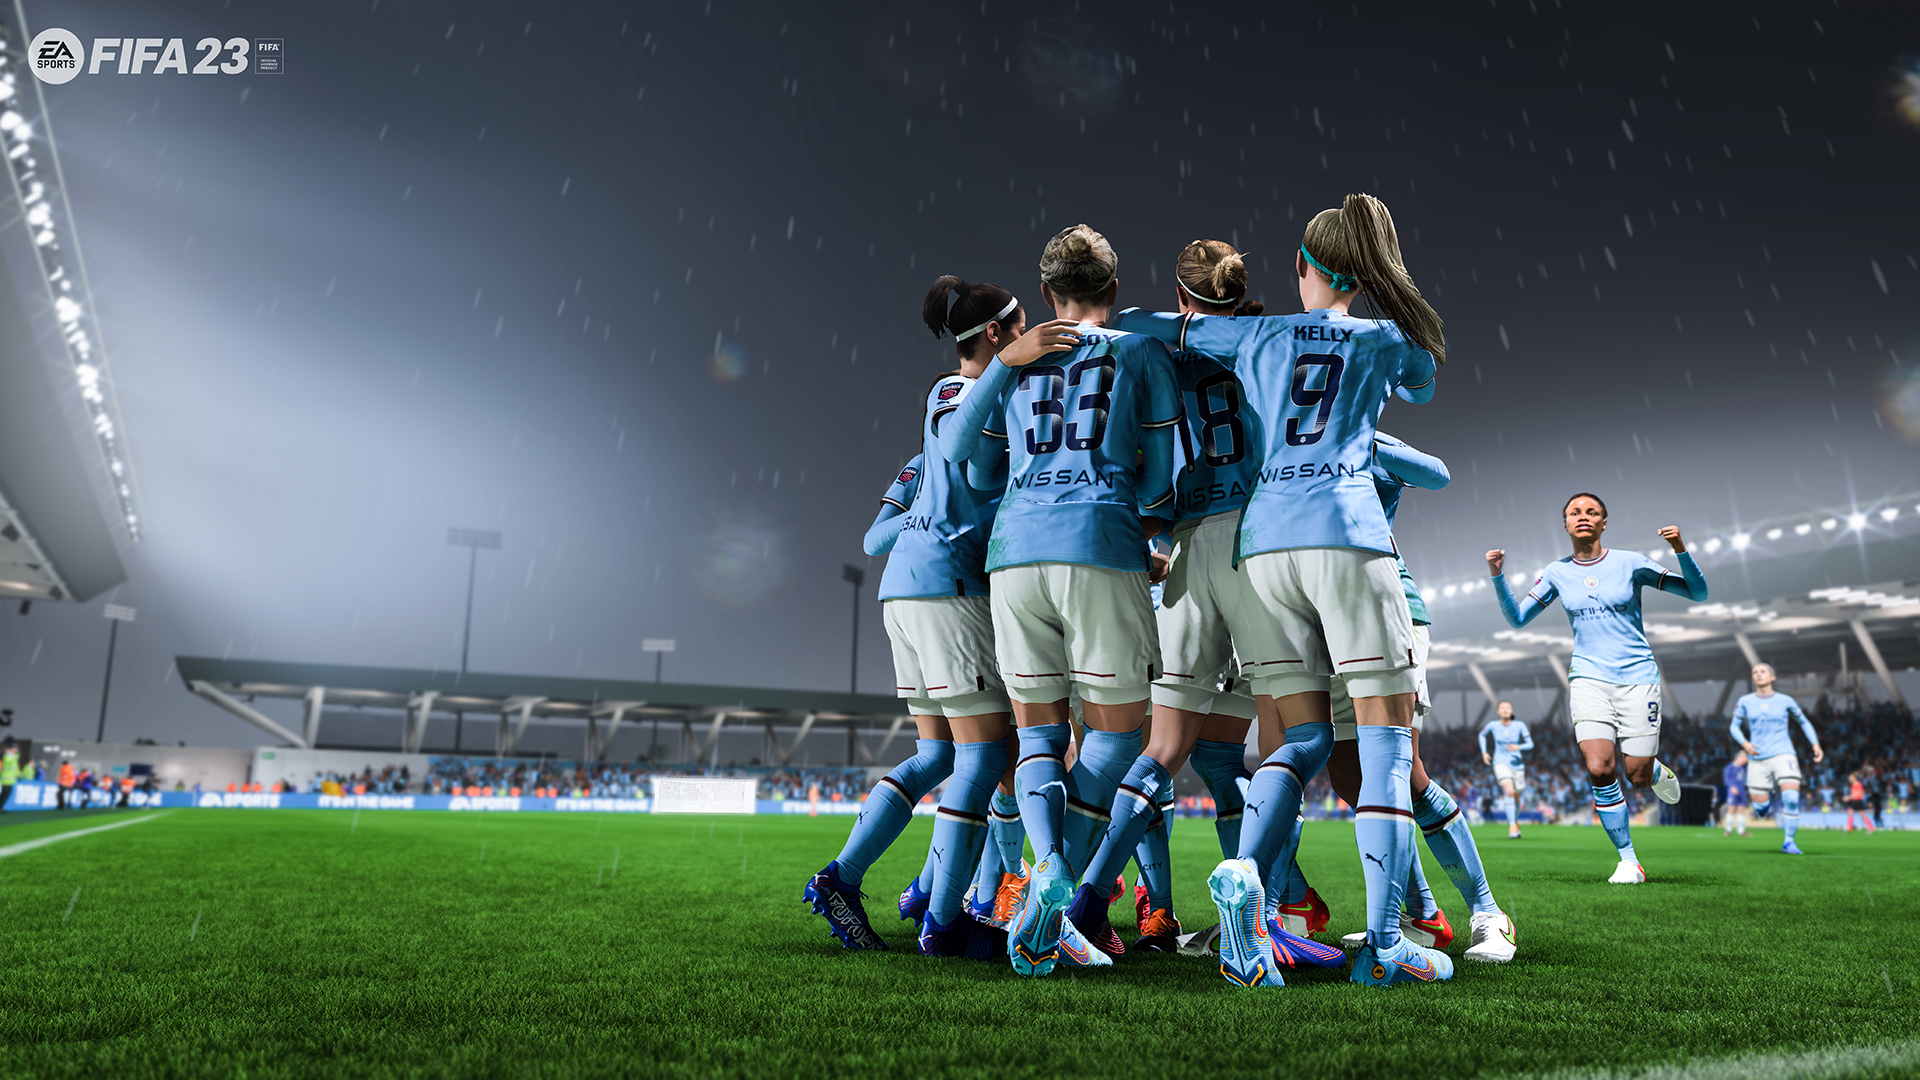 FIFA 23 And 3 More Games Are FREE This Week on PlayStation, EA